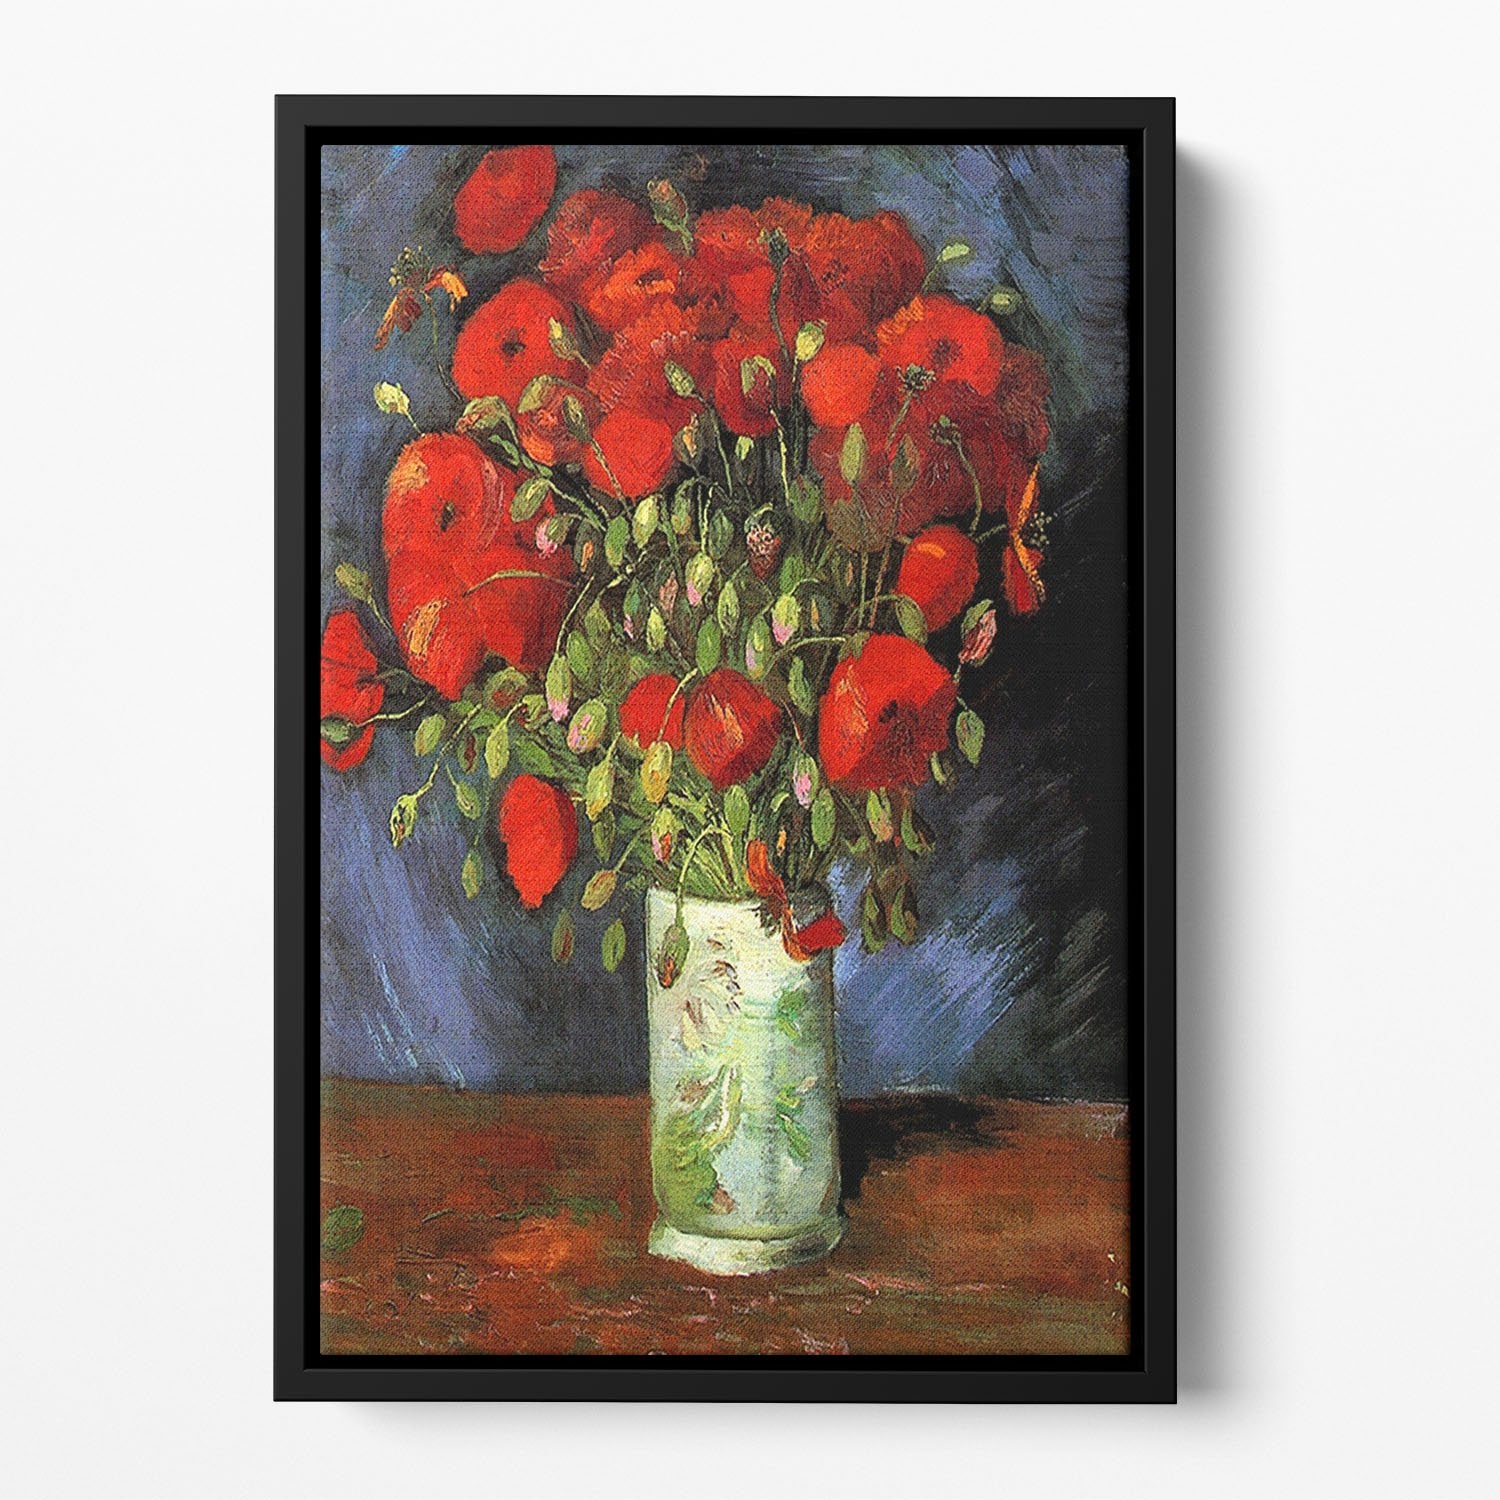 Vase with Red Poppies by Van Gogh Floating Framed Canvas